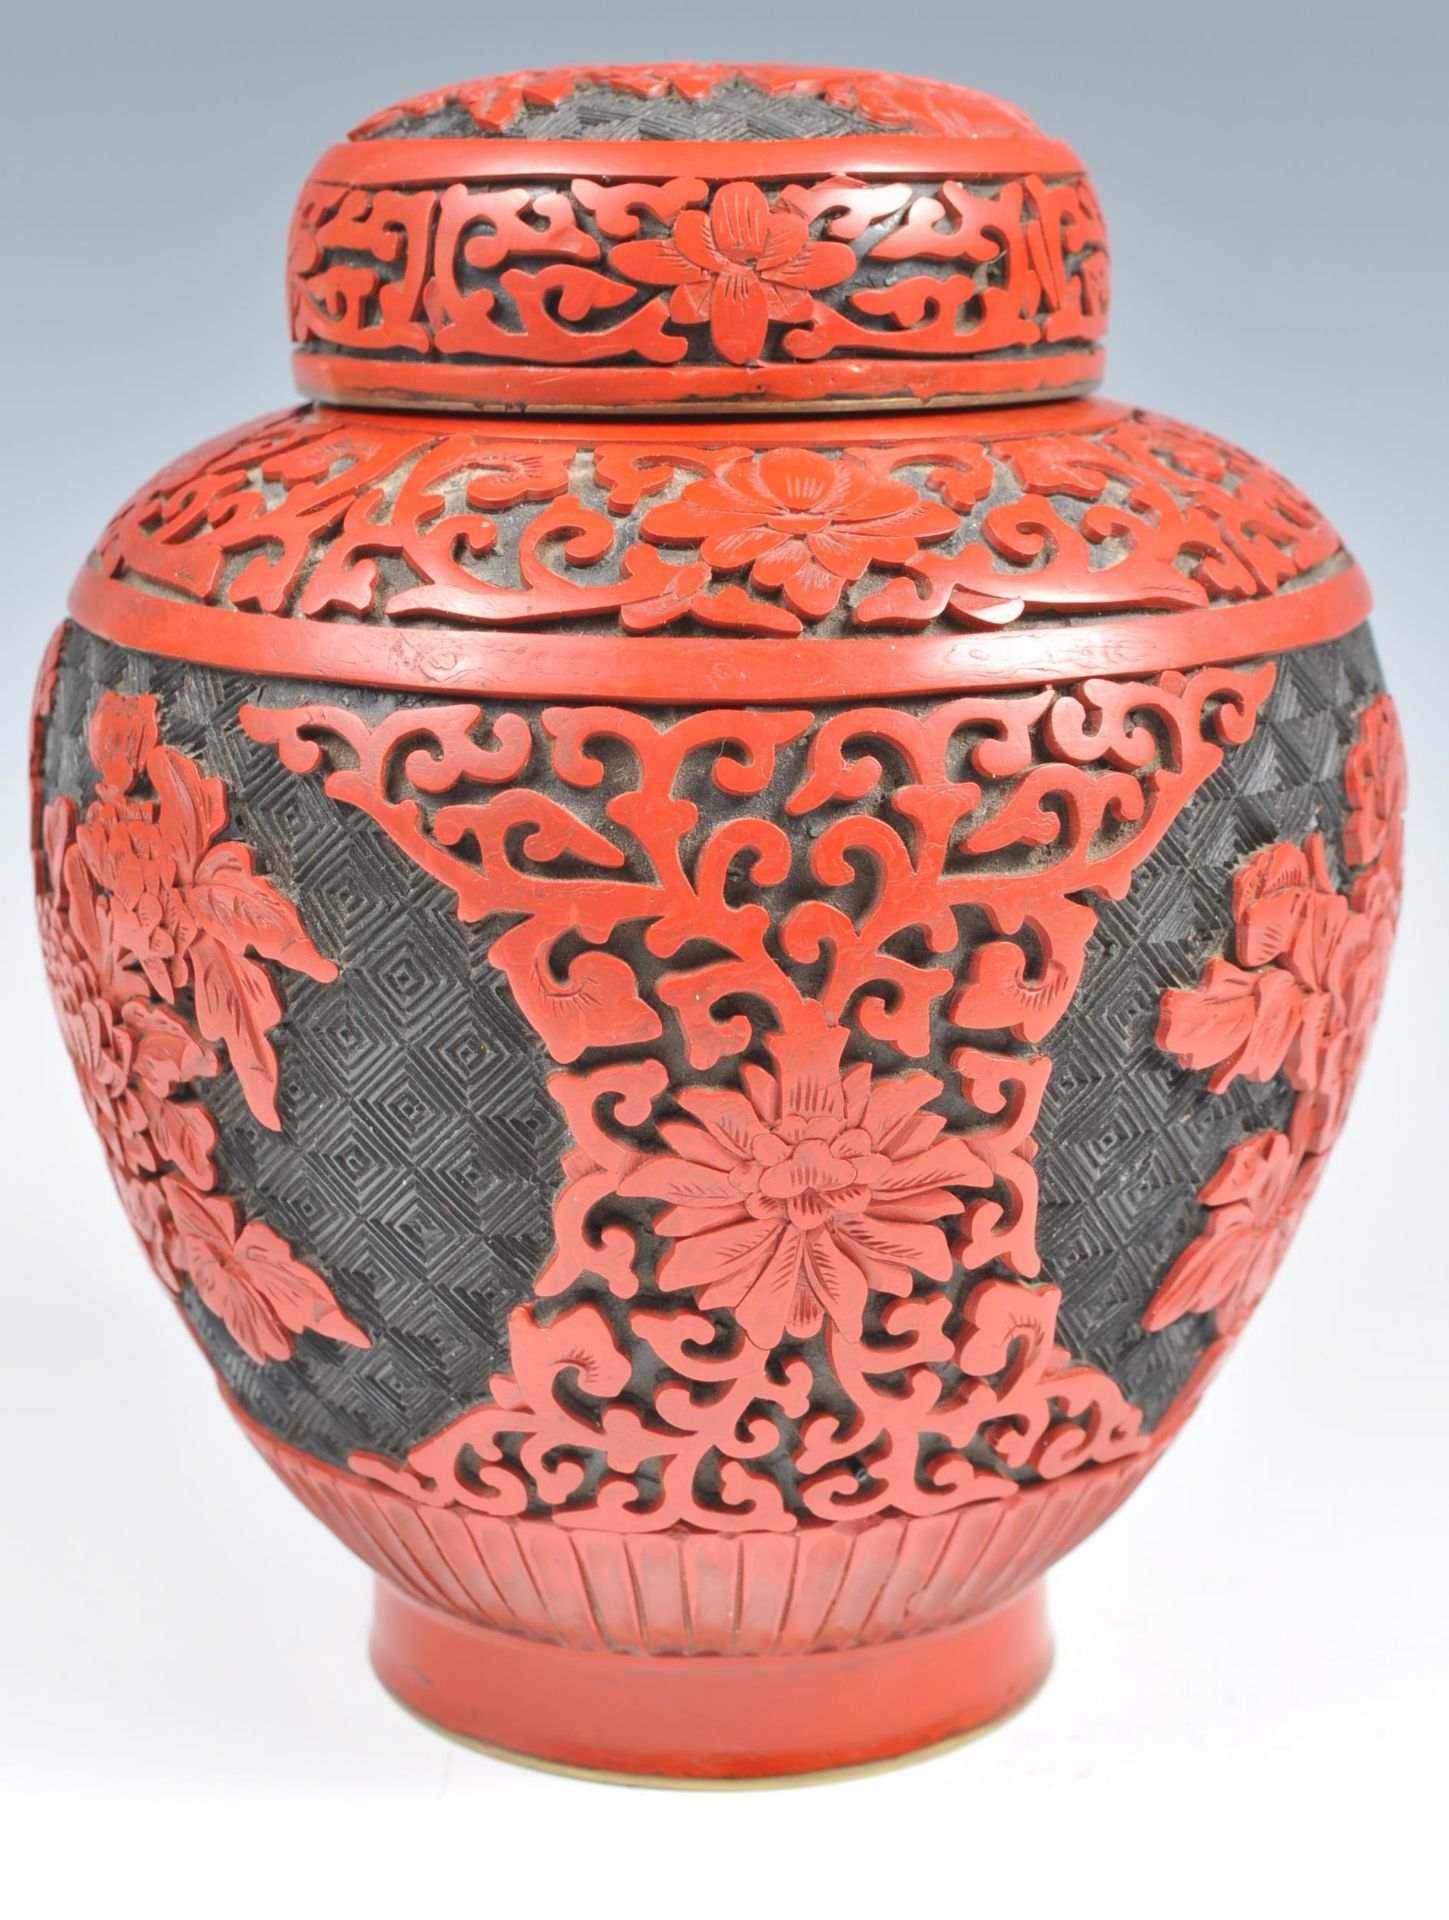 19TH CENTURY CHINESE CINNABAR LACQUER GINGER JAR AND COVER. - Image 4 of 8